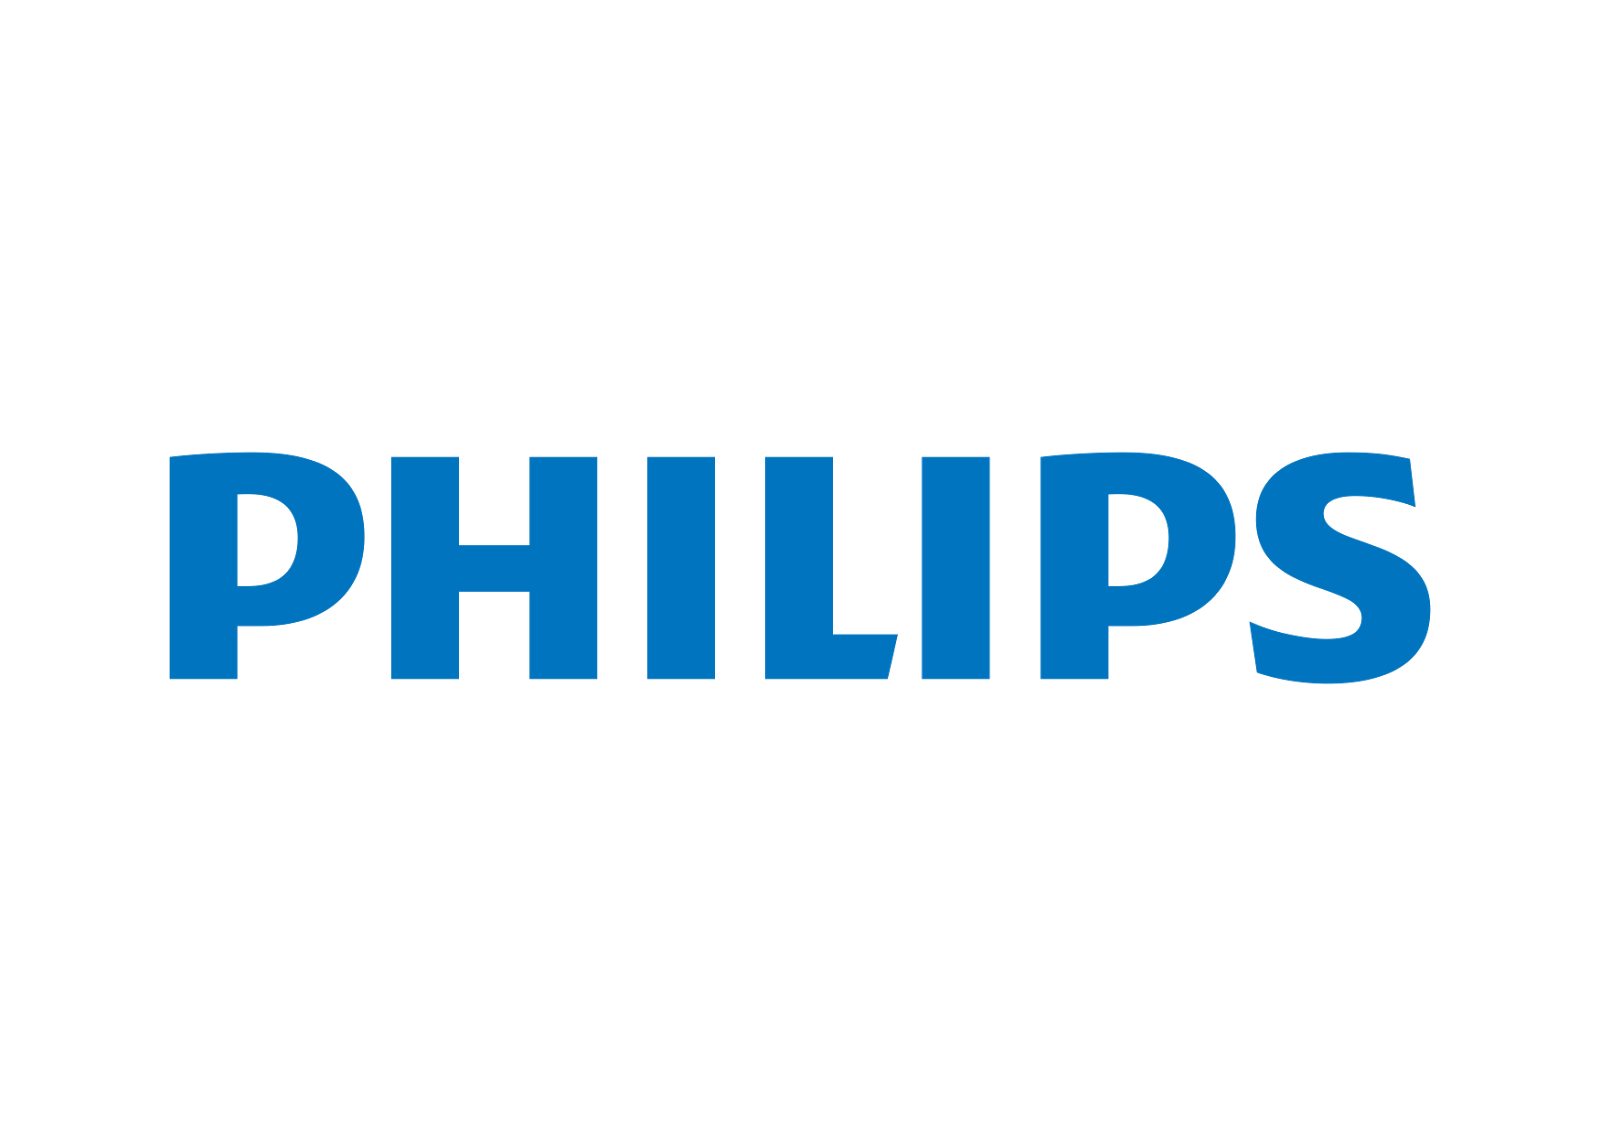 logo_philips.png